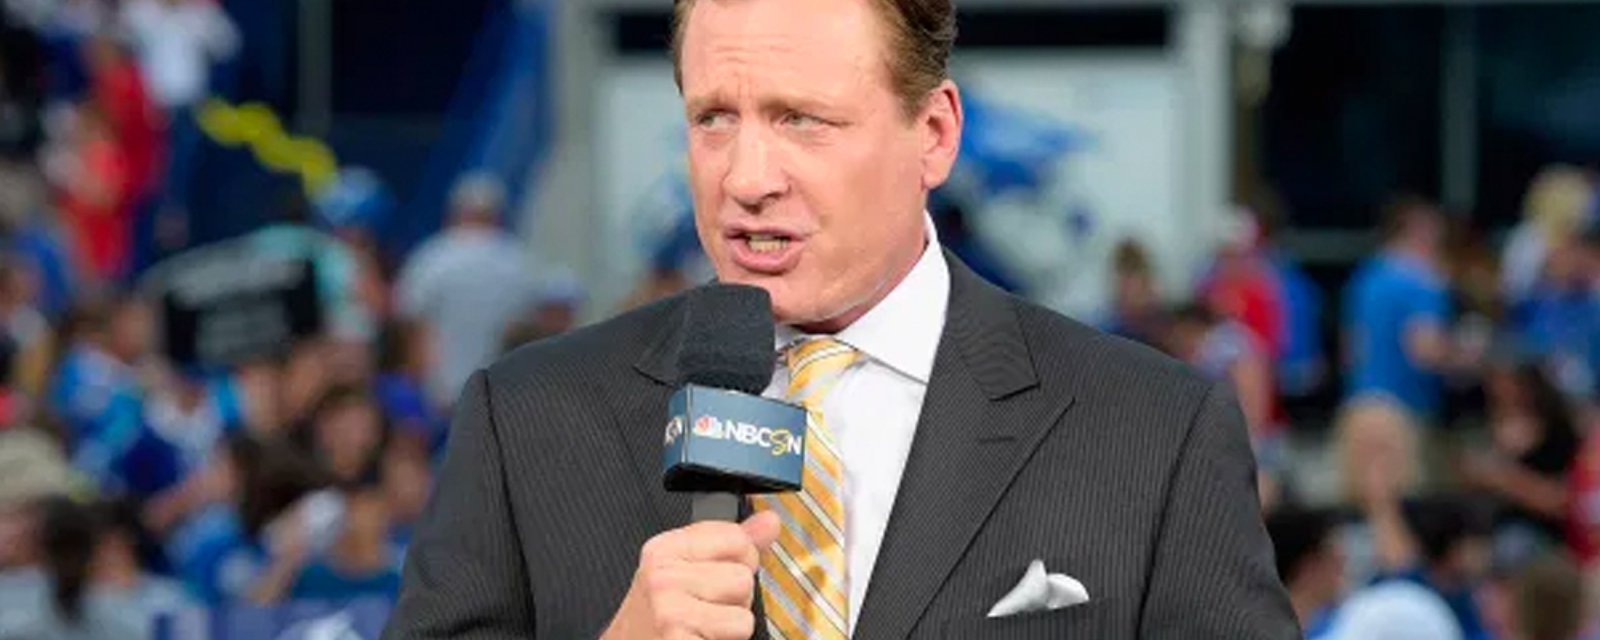 Roenick's lawsuit against NBC tossed out